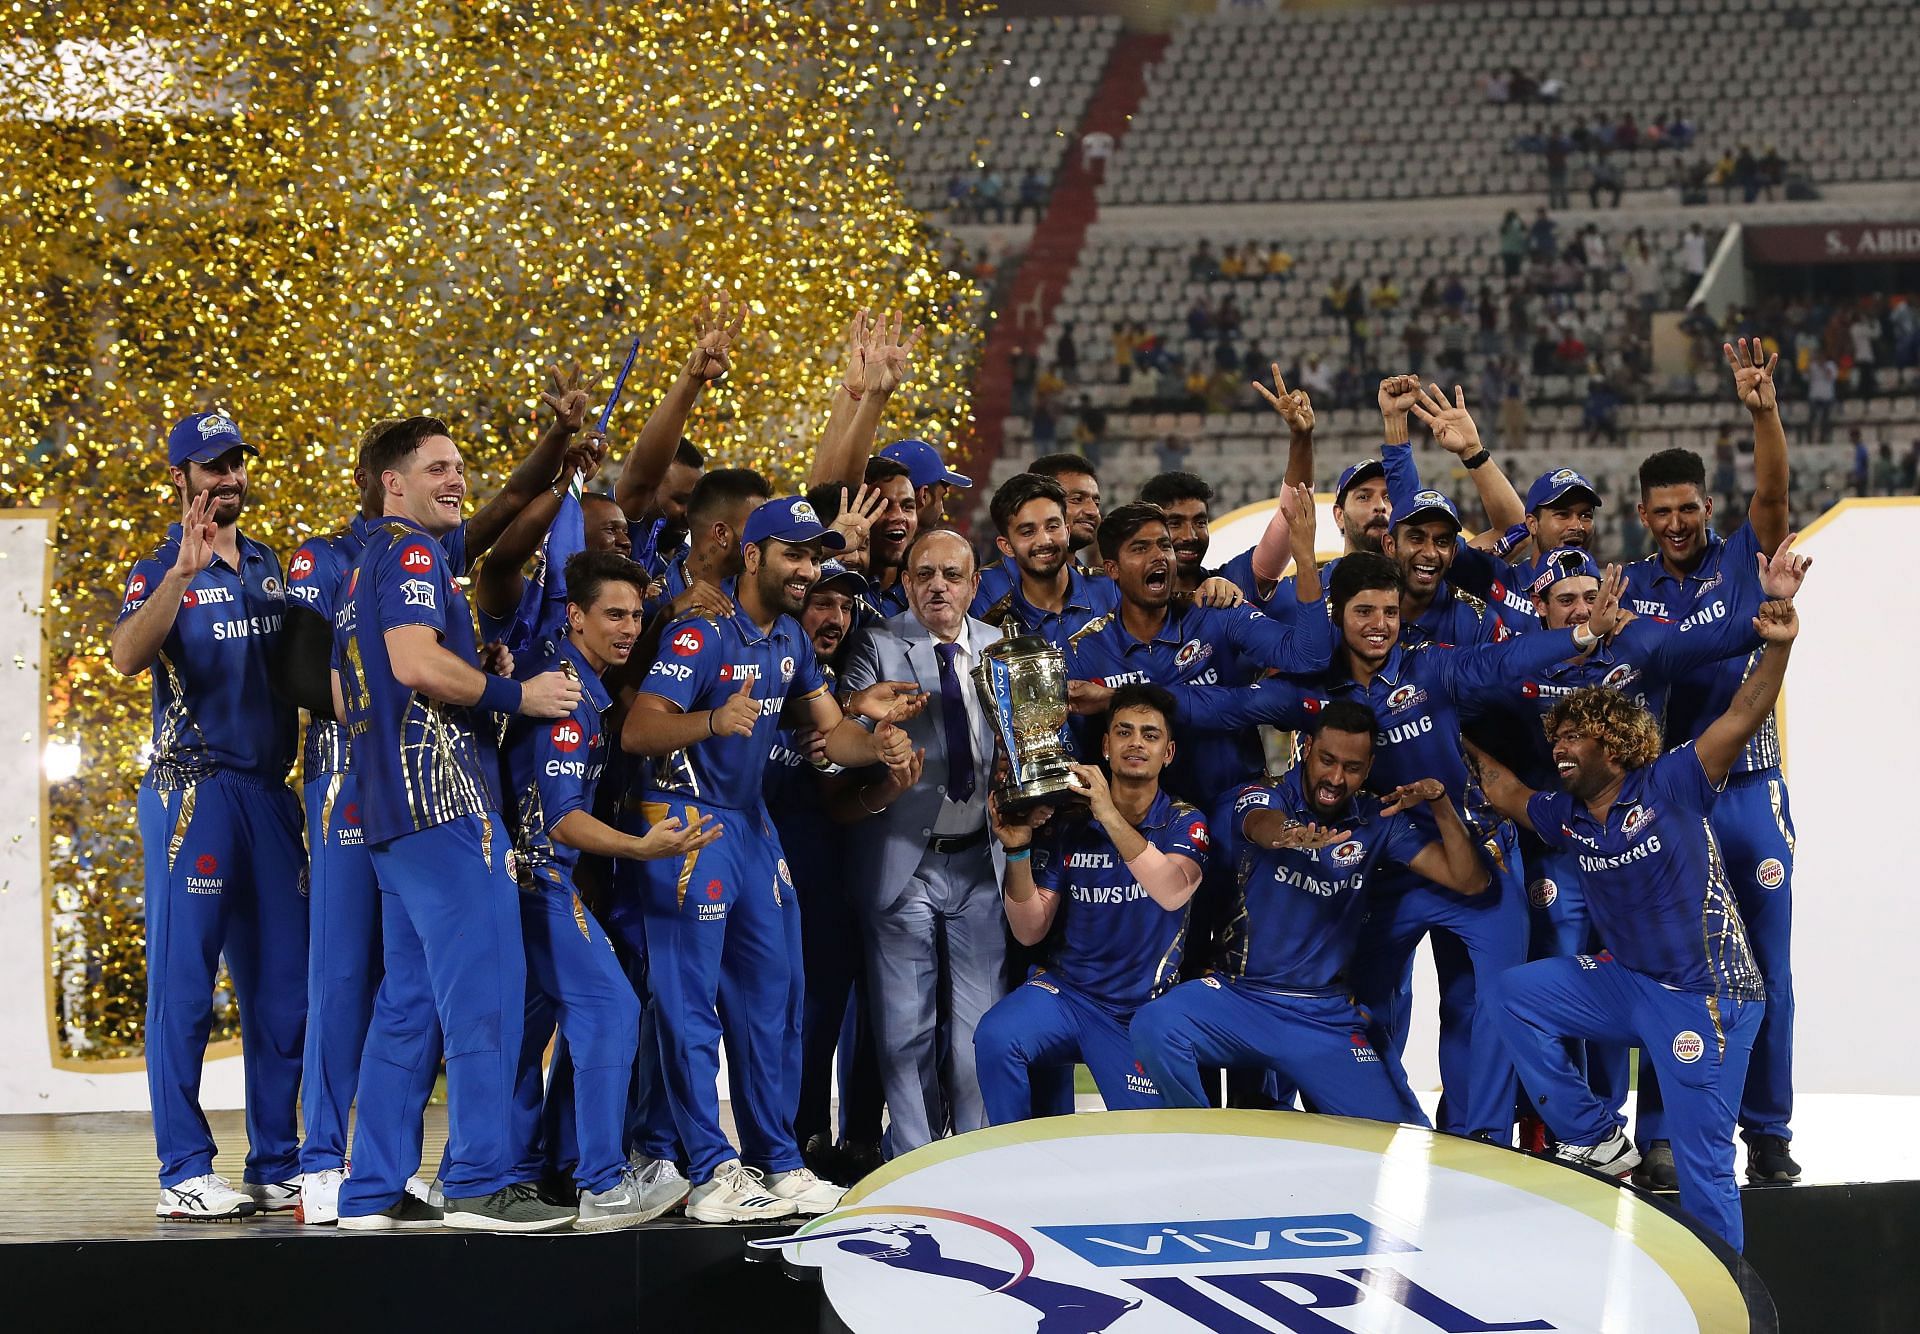 Which are the 3 teams with the most appearances in an IPL Final?